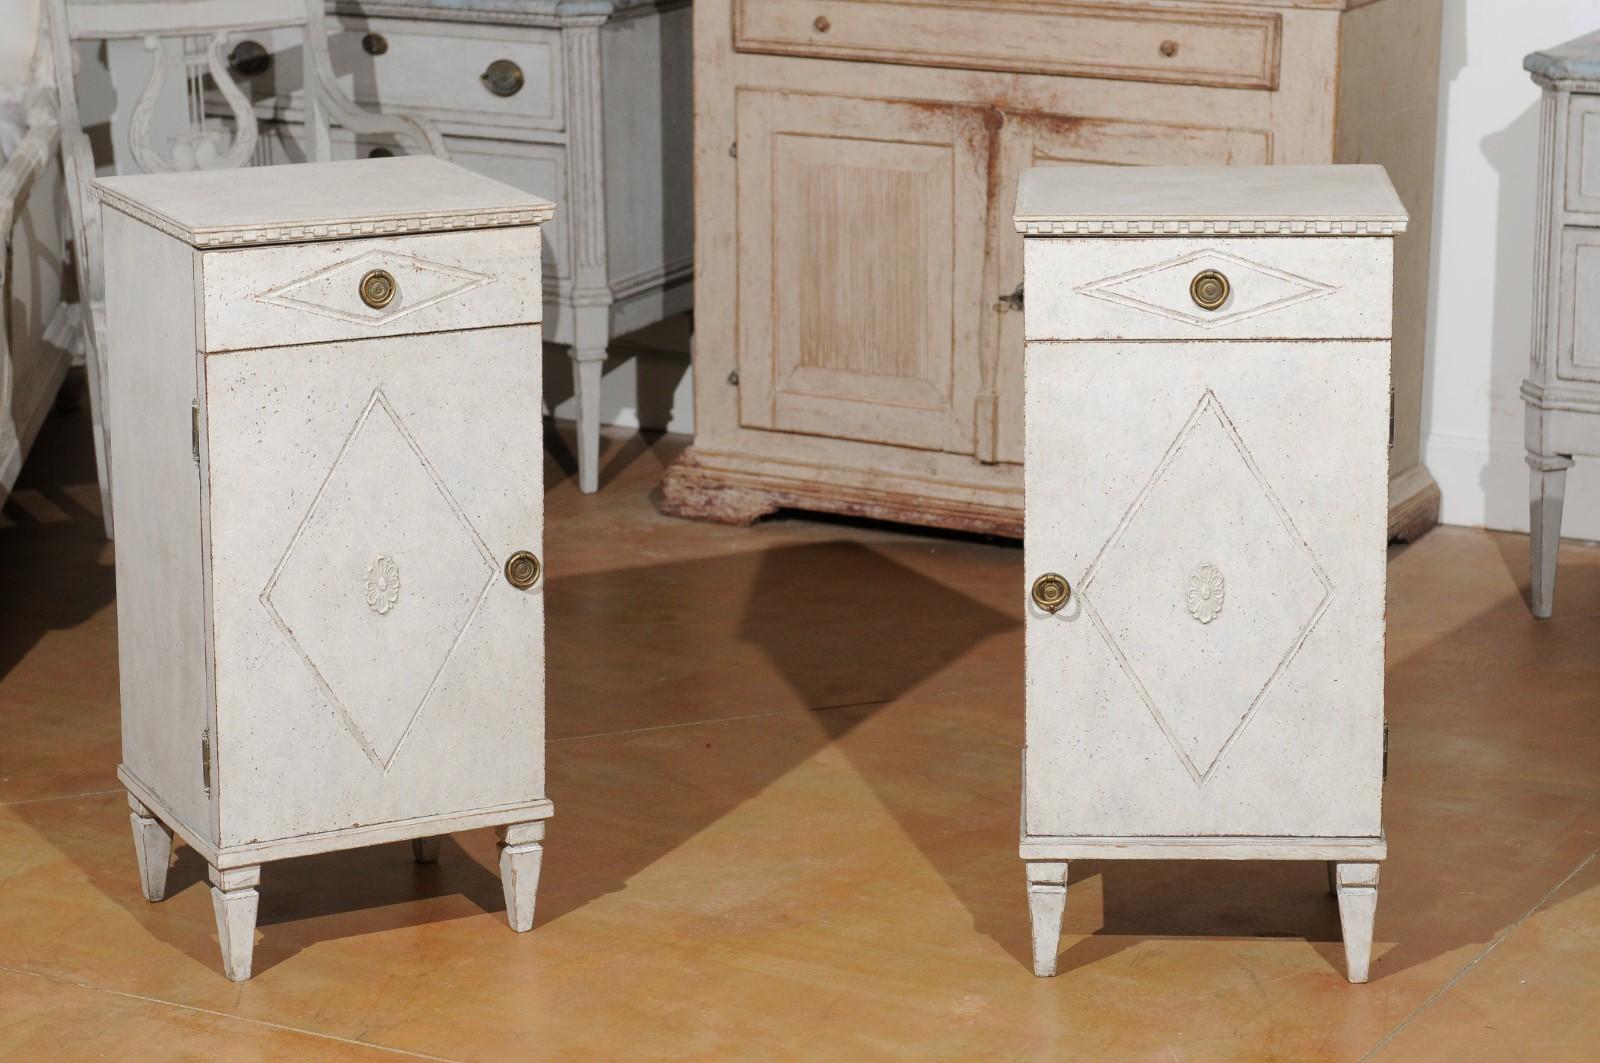 A pair of Swedish Gustavian style nightstand tables from the 19th century, with drawers, doors and diamond motifs. Created in Sweden during the 19th century, each of this pair of bedside tables features a rectangular top sitting above a dentil-style